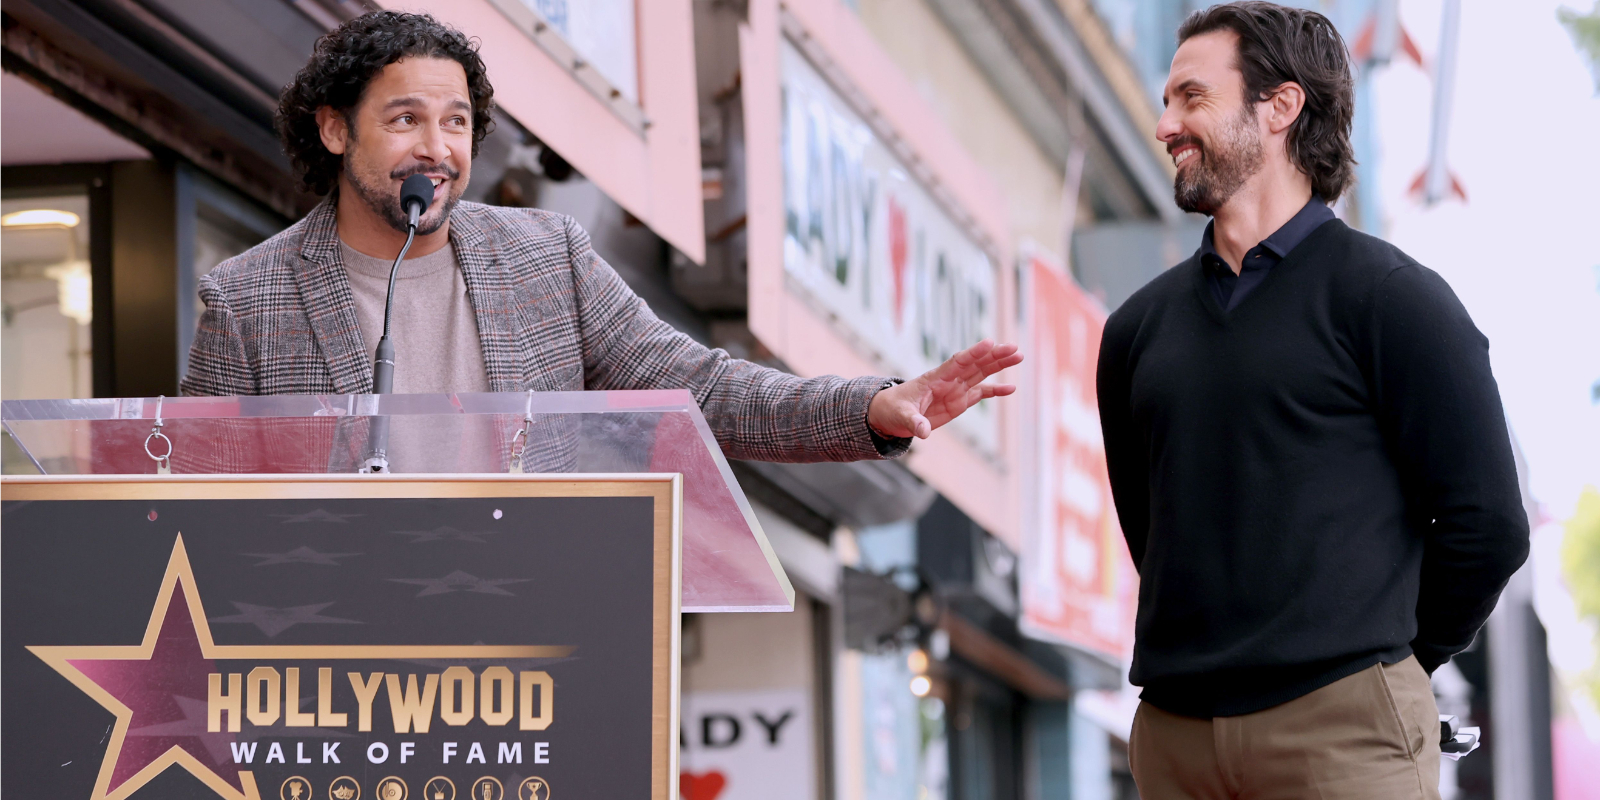 Jon Huertas and Milo Ventimiglia pose during his Hollywood Walk of Fame induction ceremony.